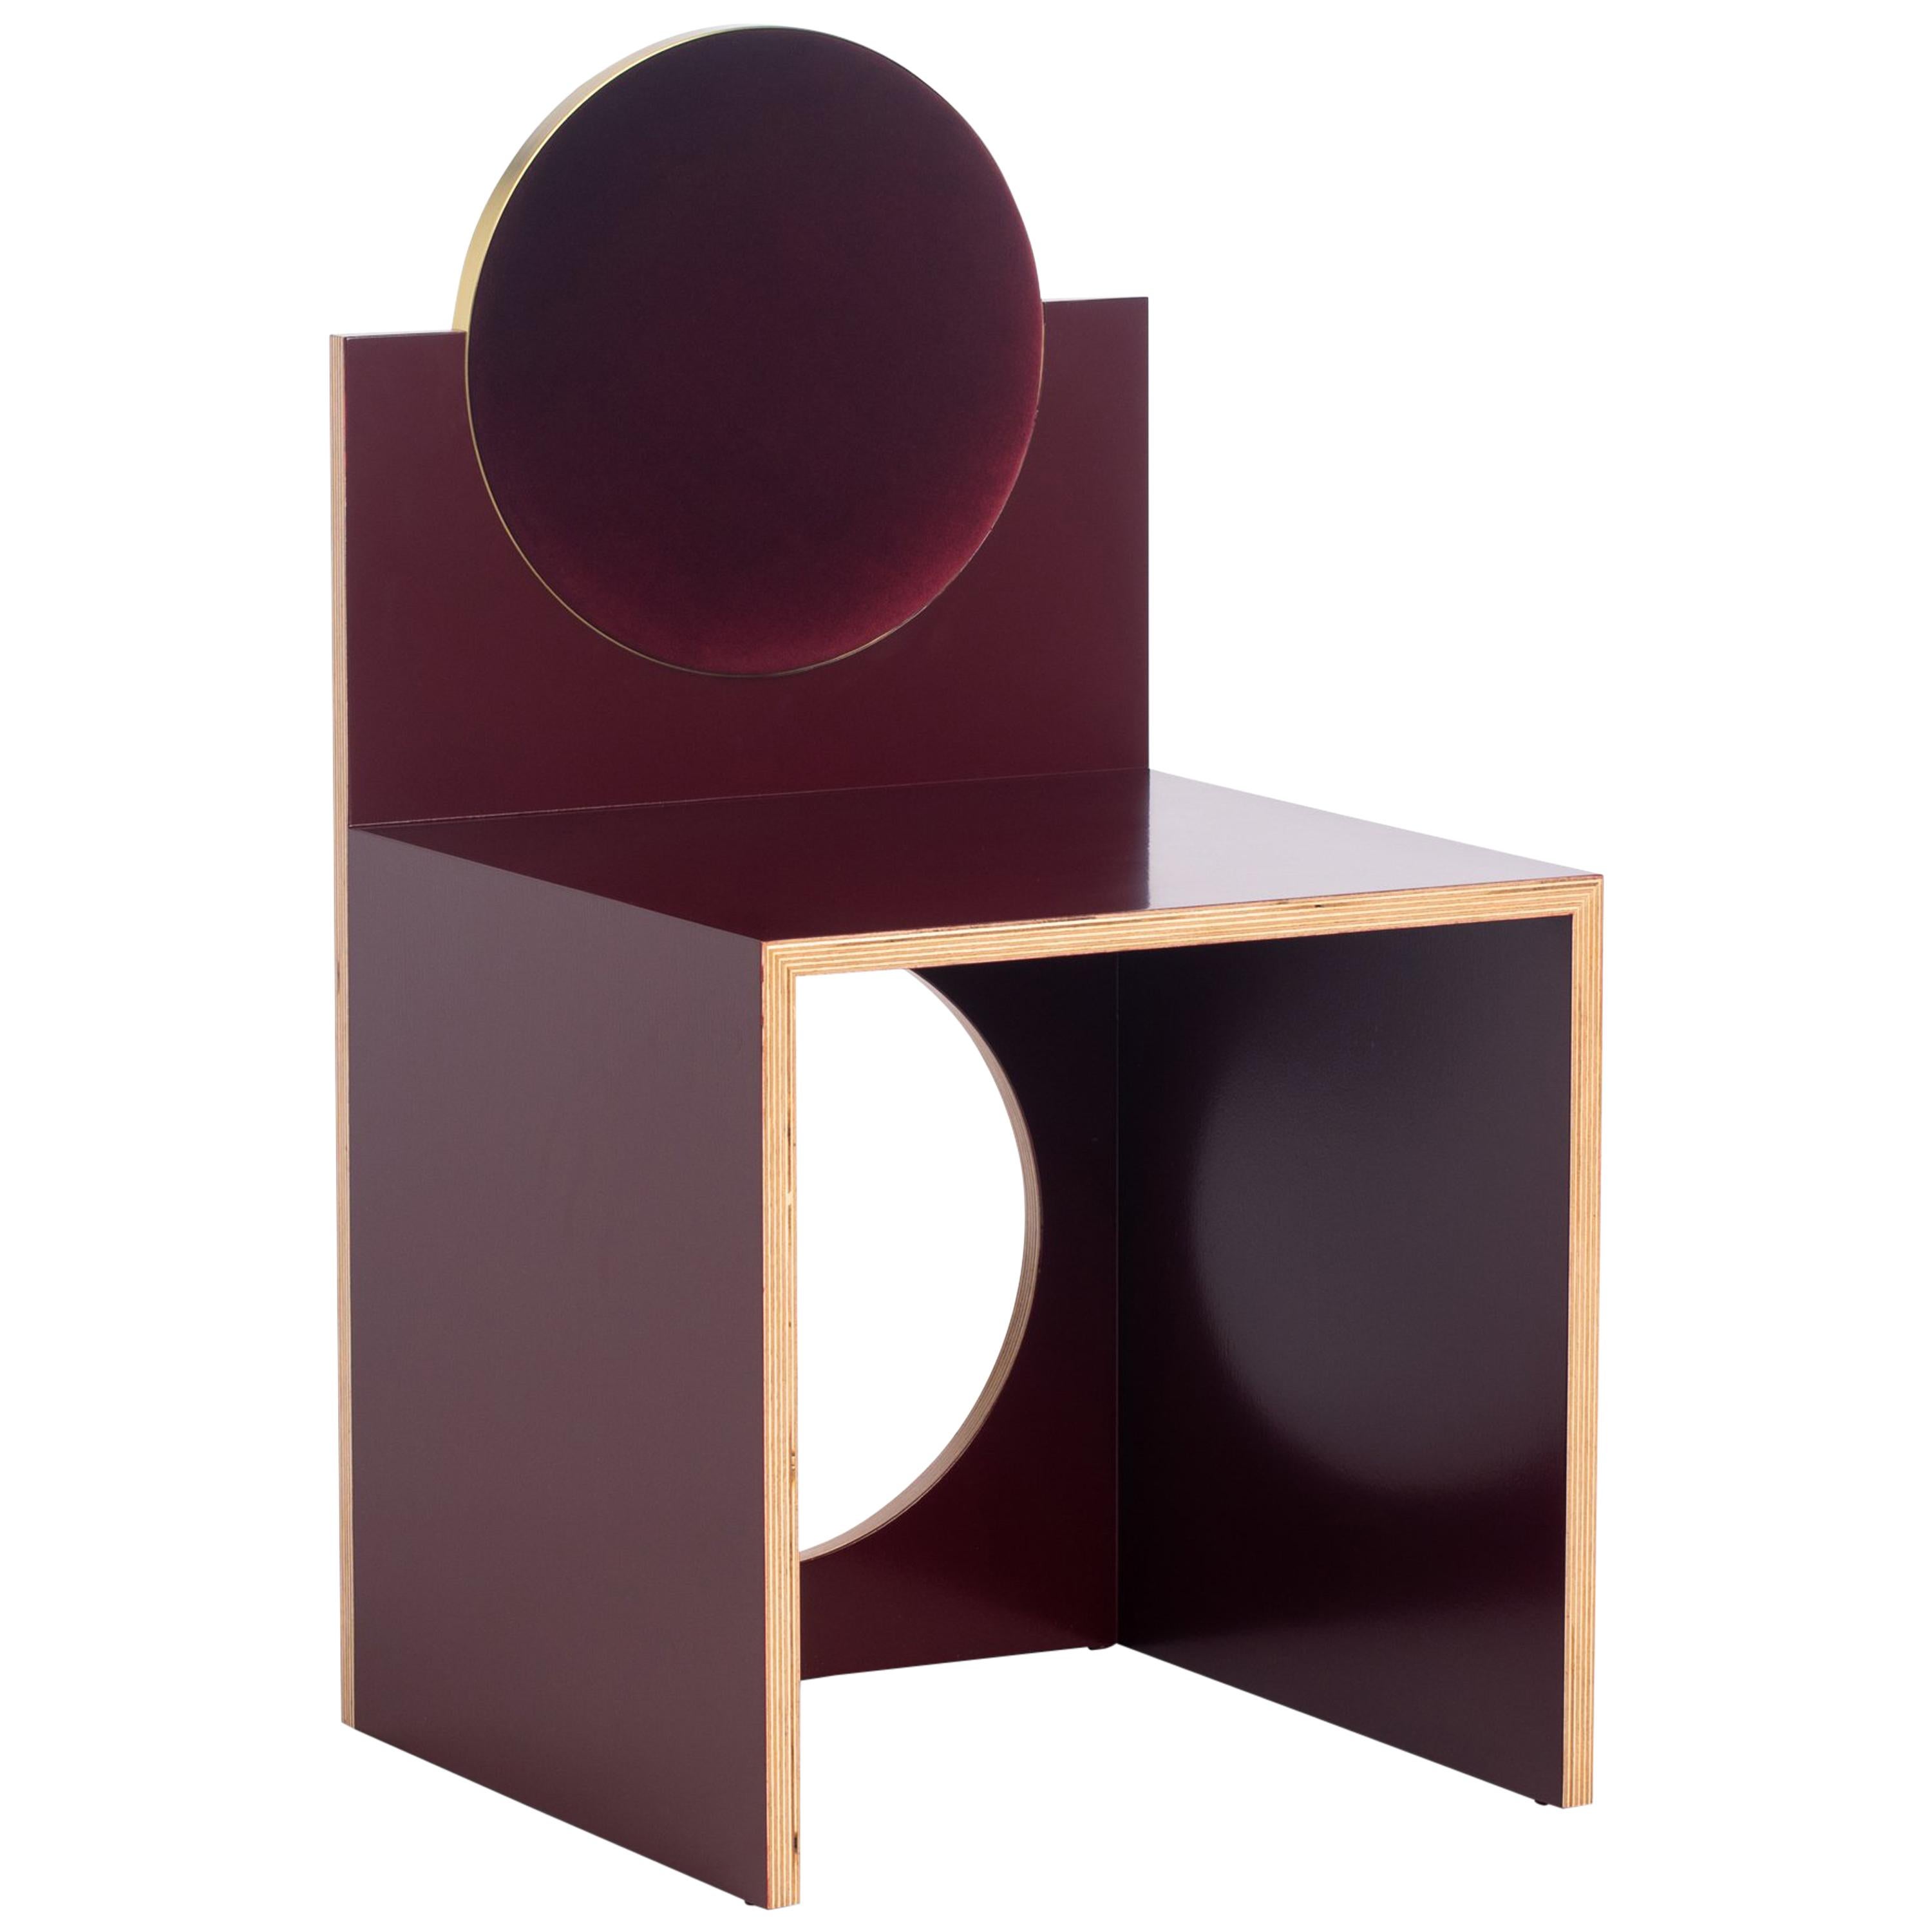 Void Chair in Bourdeaux from the Qualia Collection by Azadeh Shladovsky For Sale